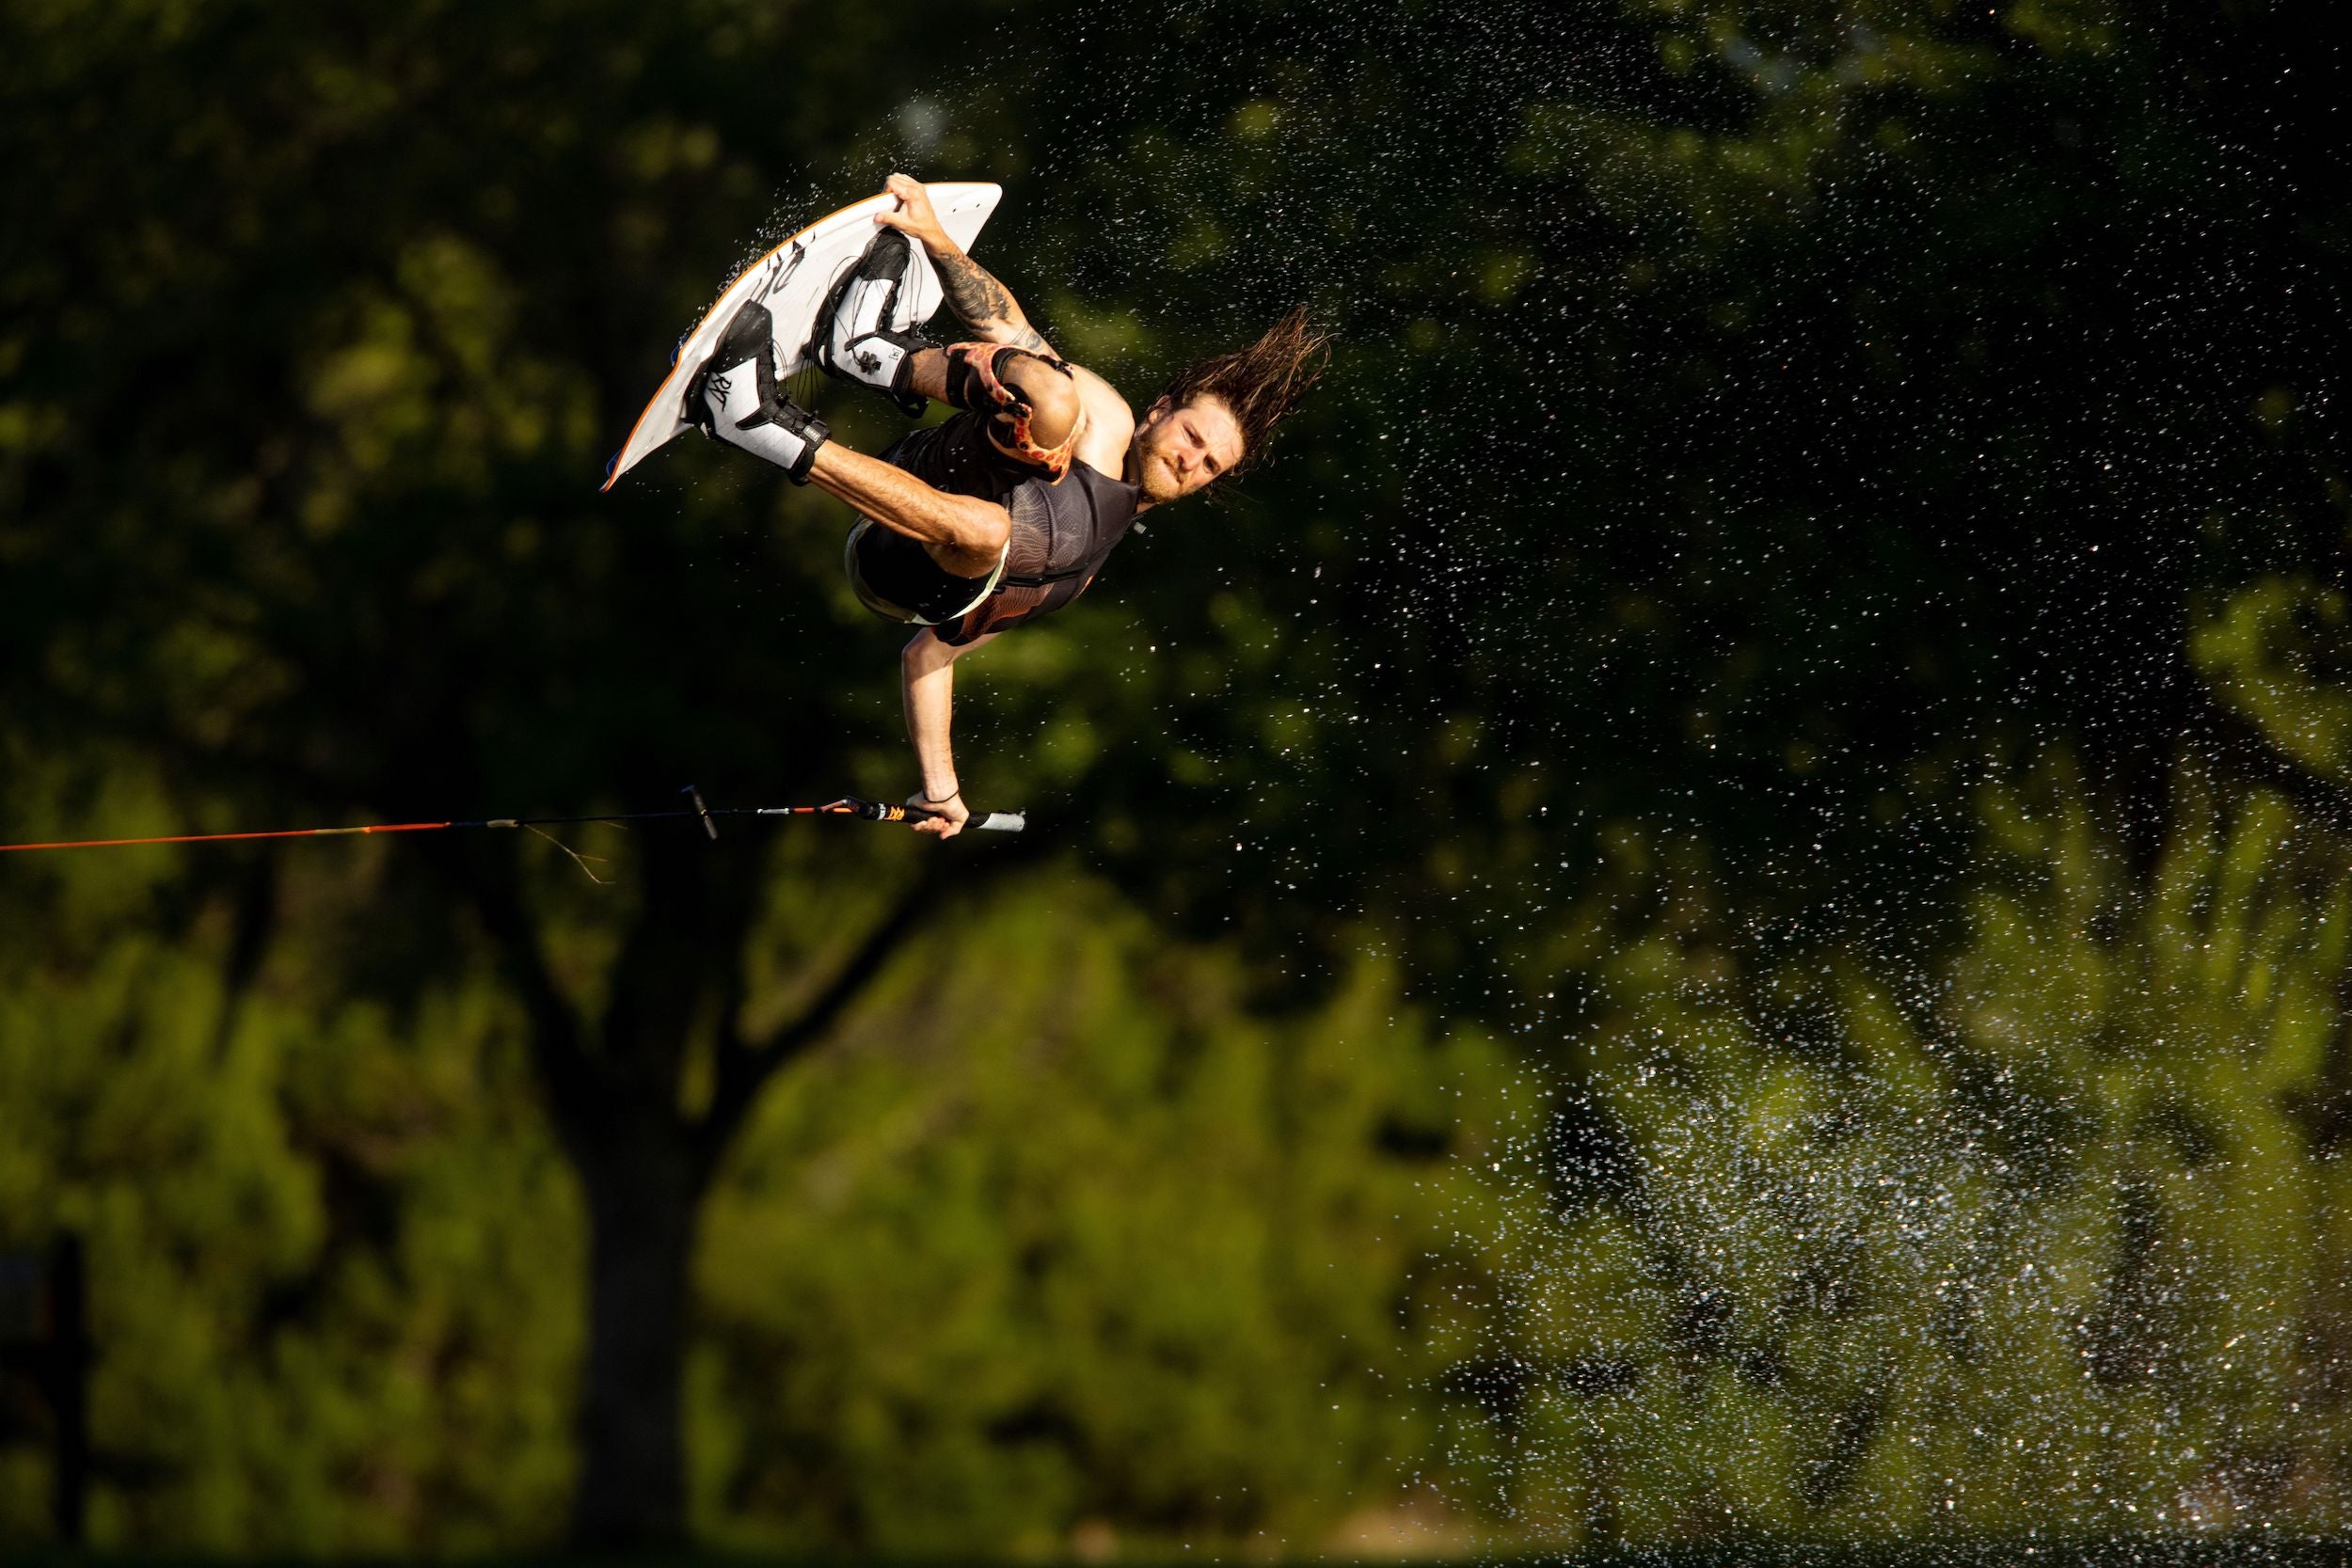 A person gliding effortlessly through the air on a wakeboard with comfortable boots and extreme lightweight flexibility, provided by the Ronix 2023 RXT Boots.